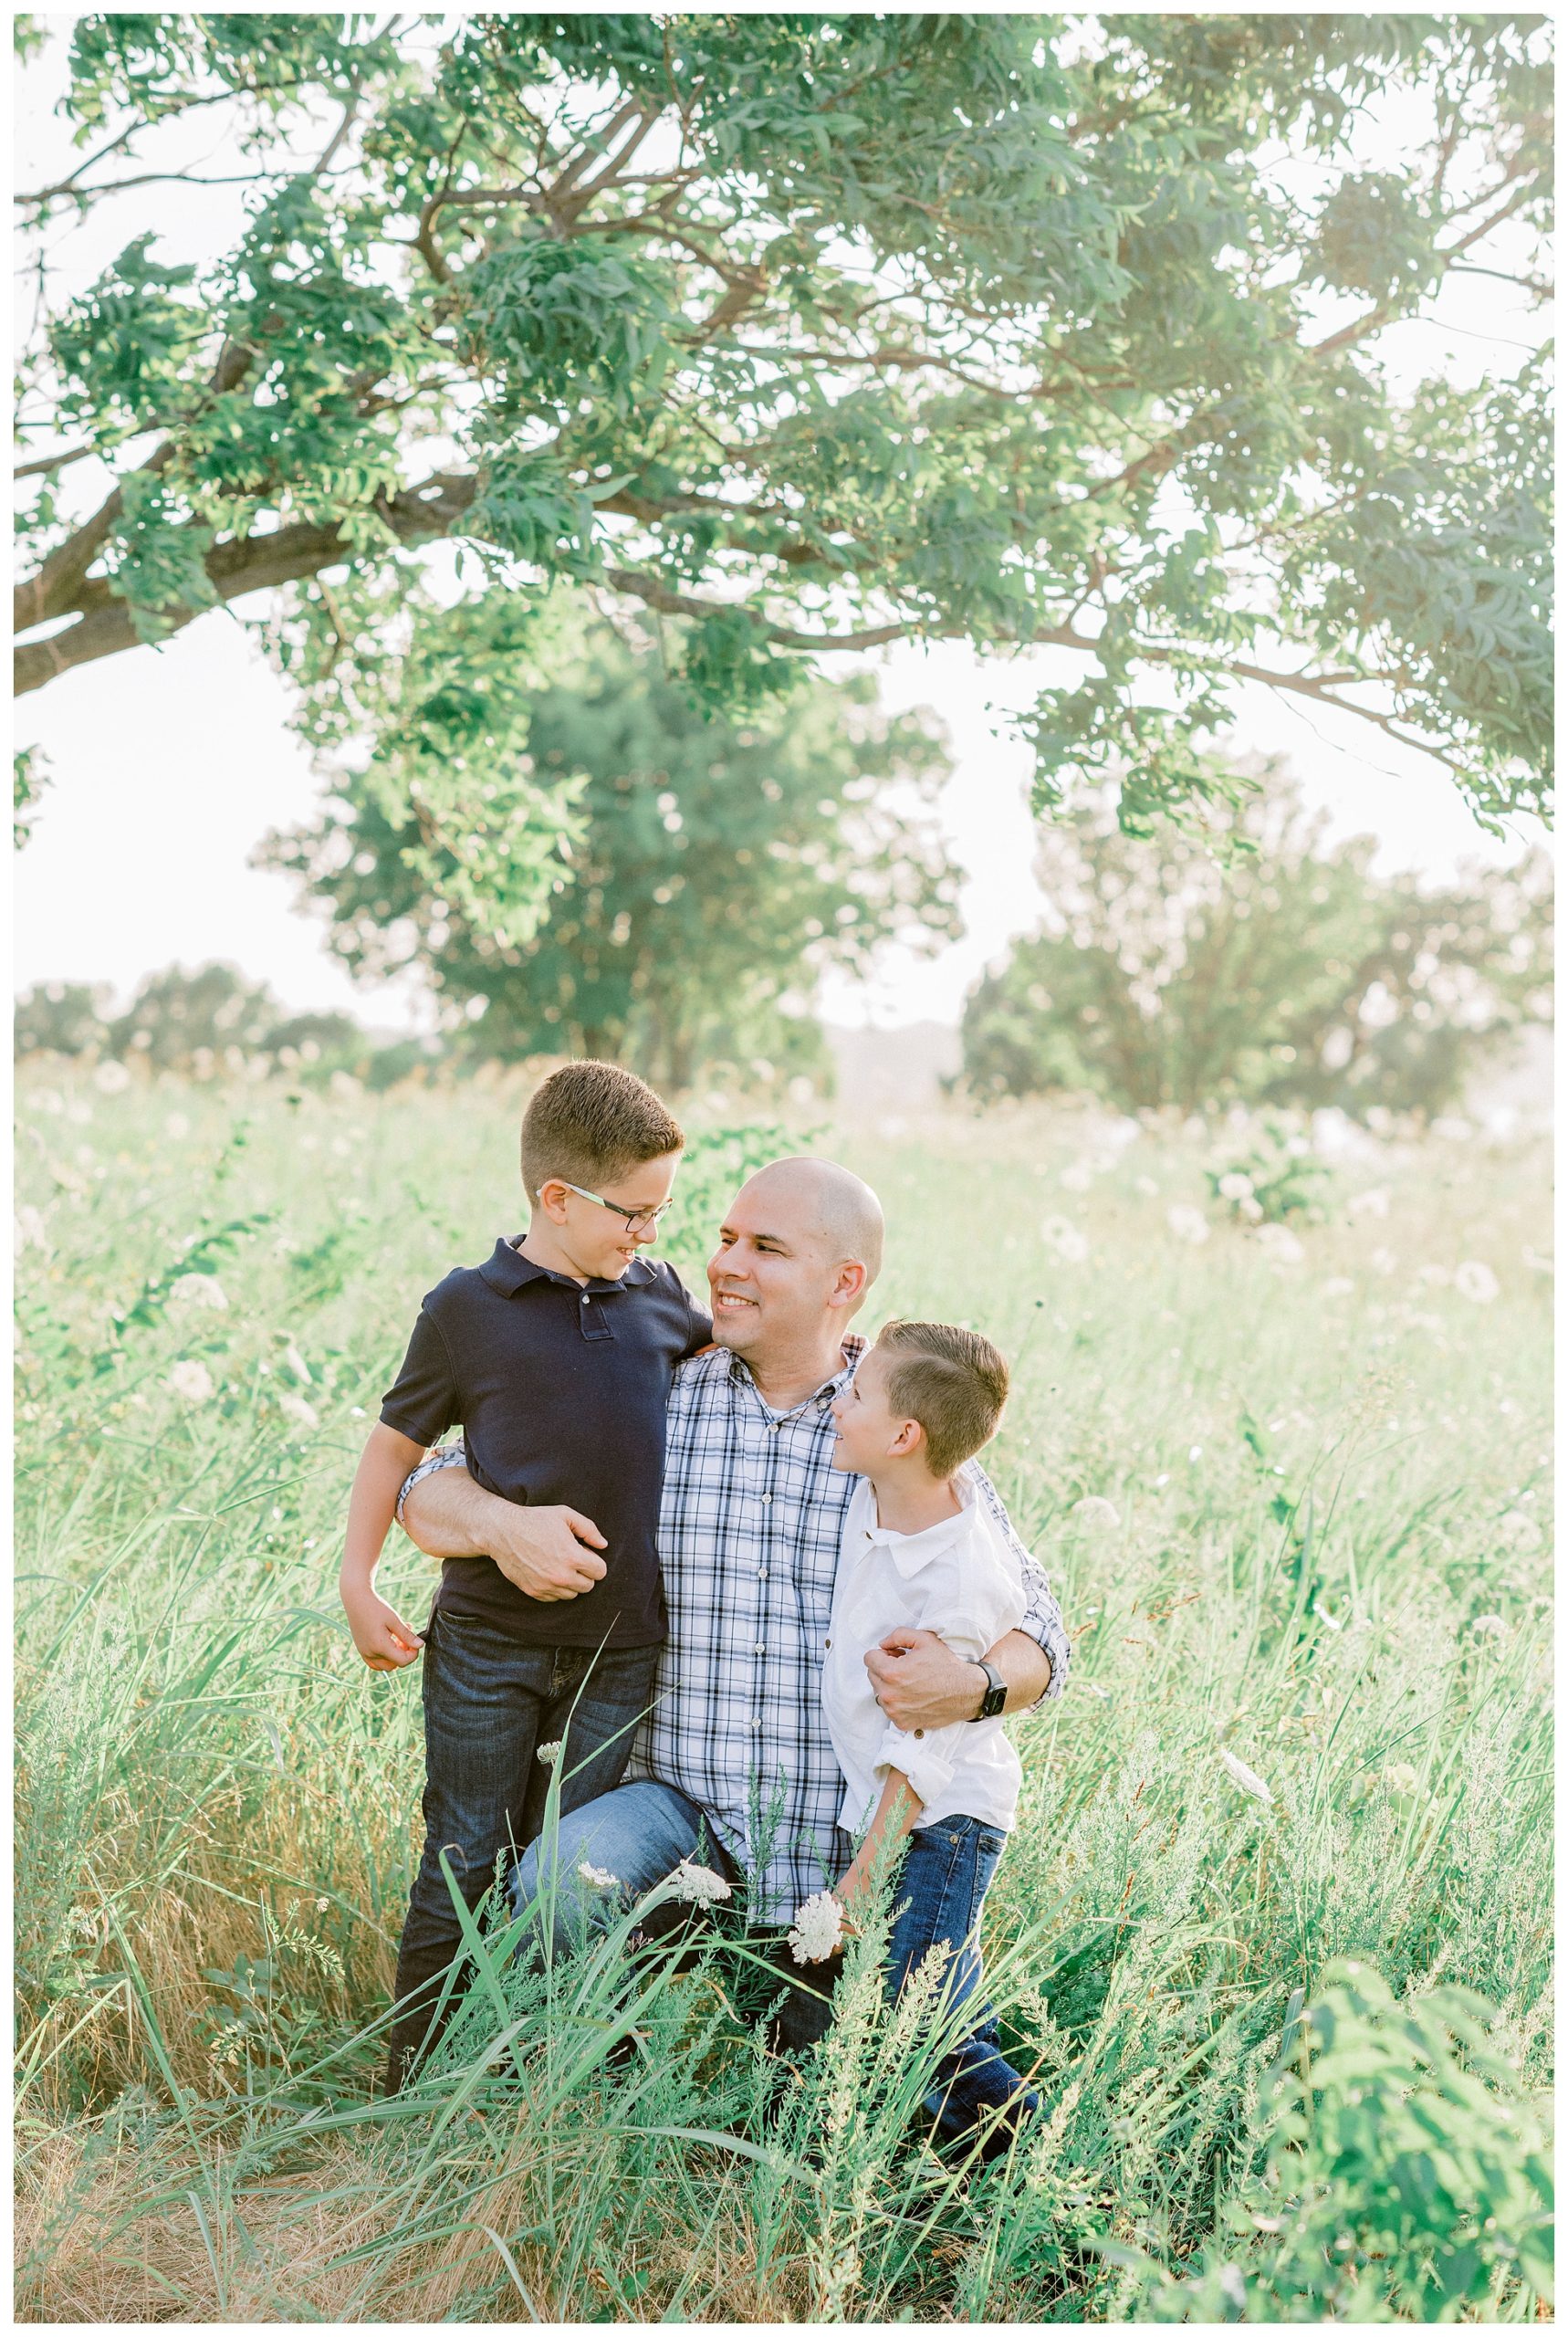 Tips for your family session